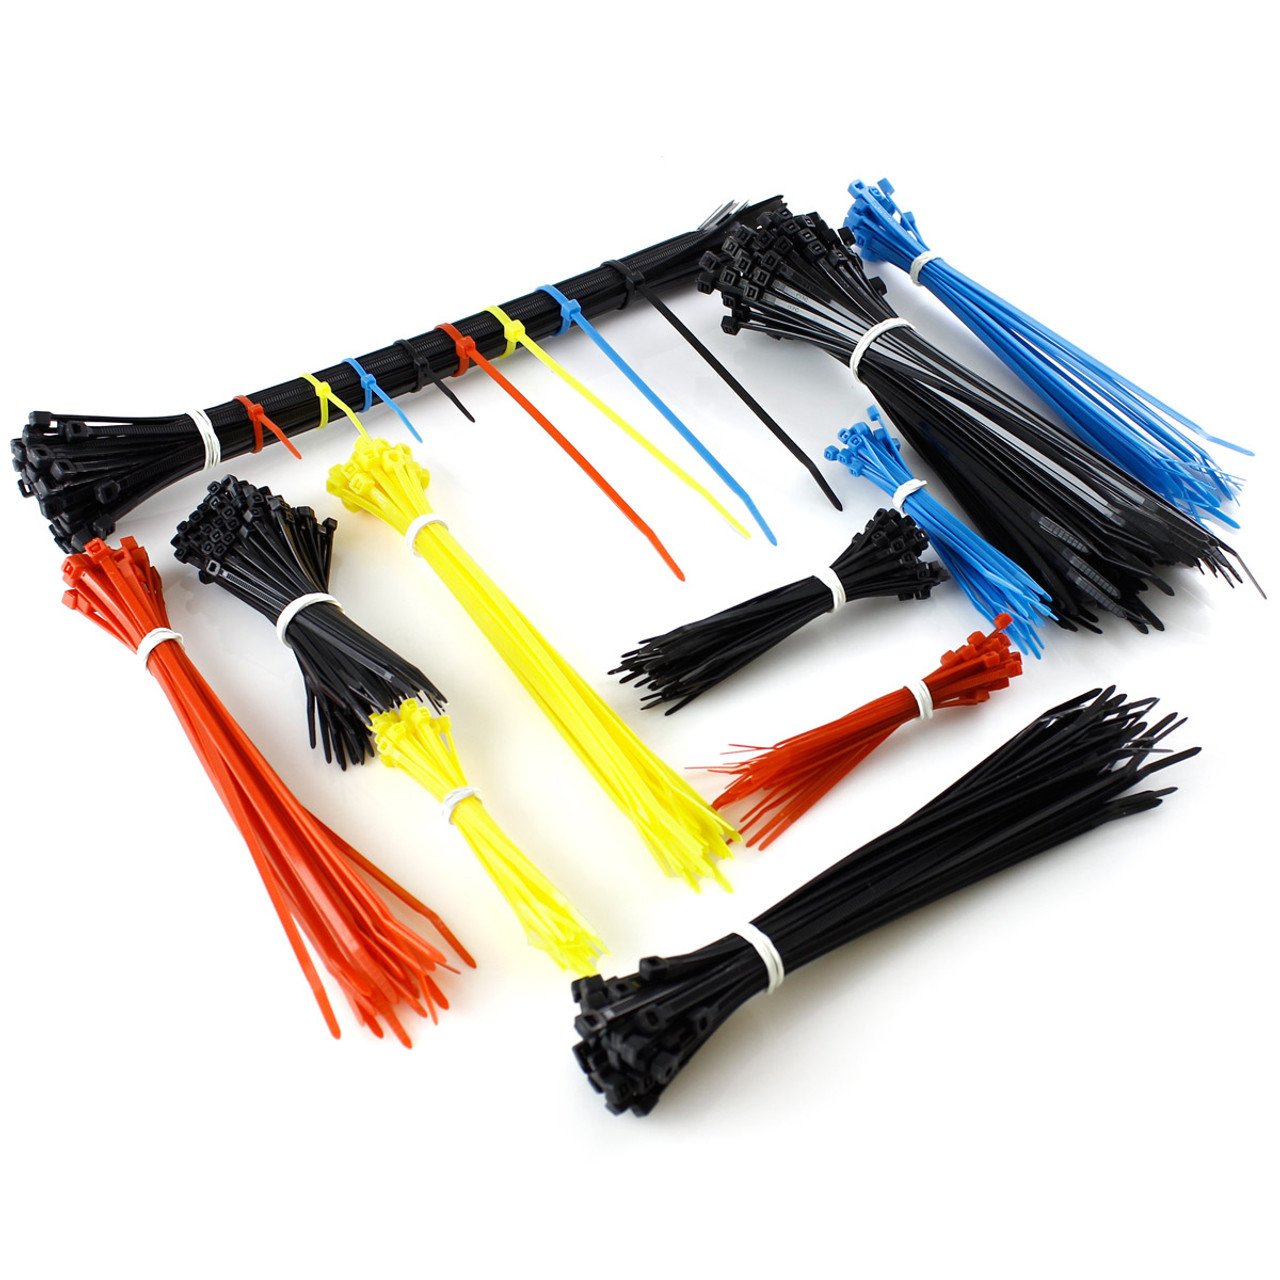 TR Industrial Assorted Nylon Cable Ties Set, 1000 Pack of Assorted Colors and Sizes